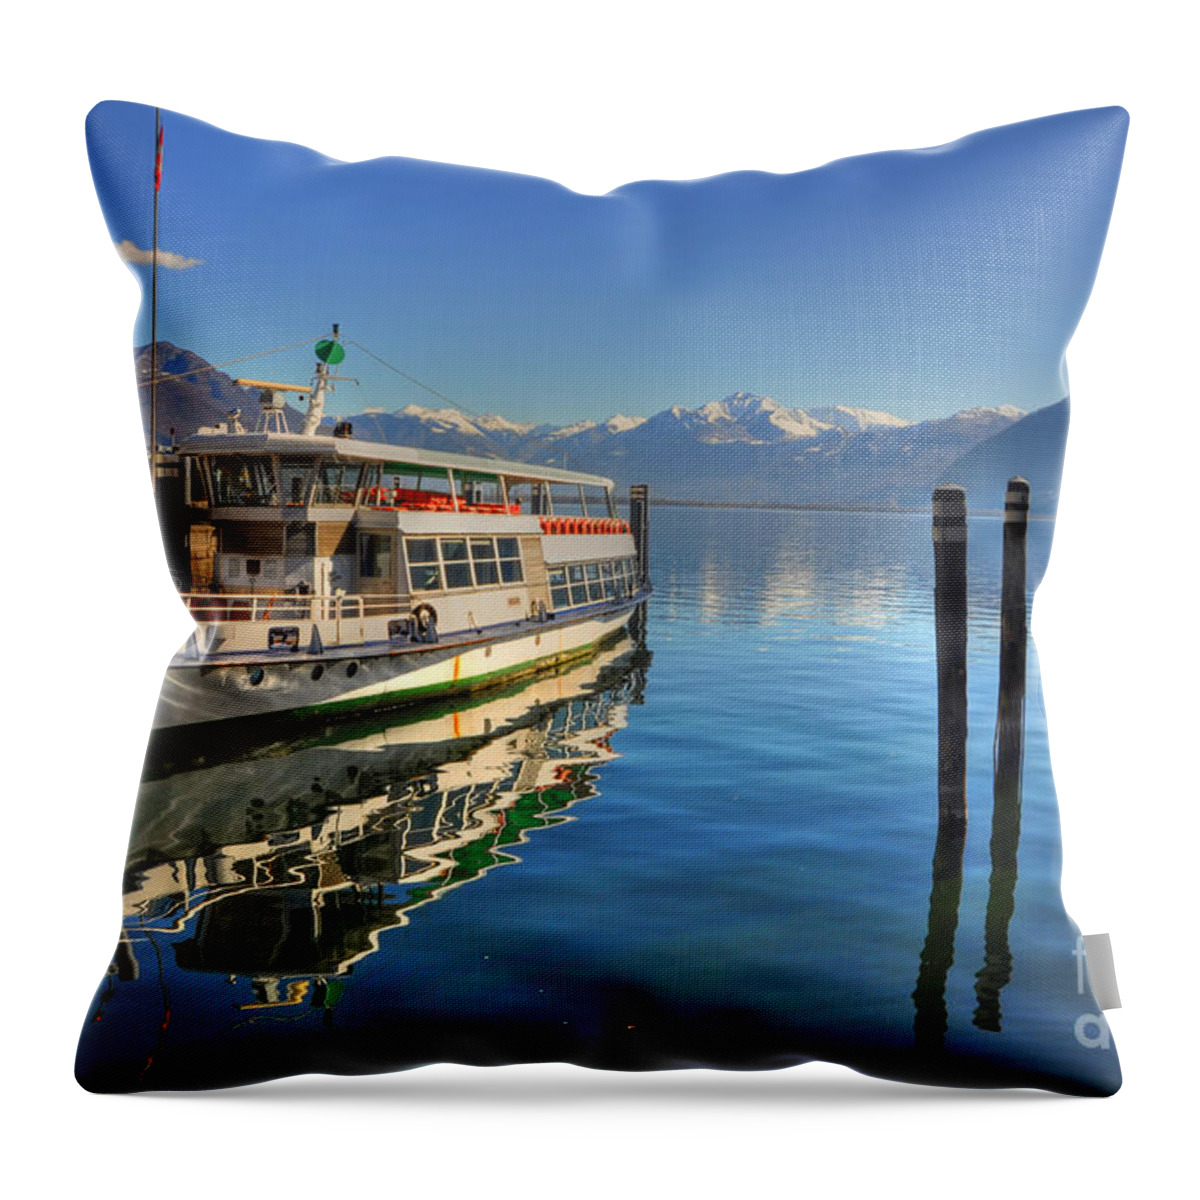 Ship Throw Pillow featuring the photograph Passenger ship reflected on the water by Mats Silvan